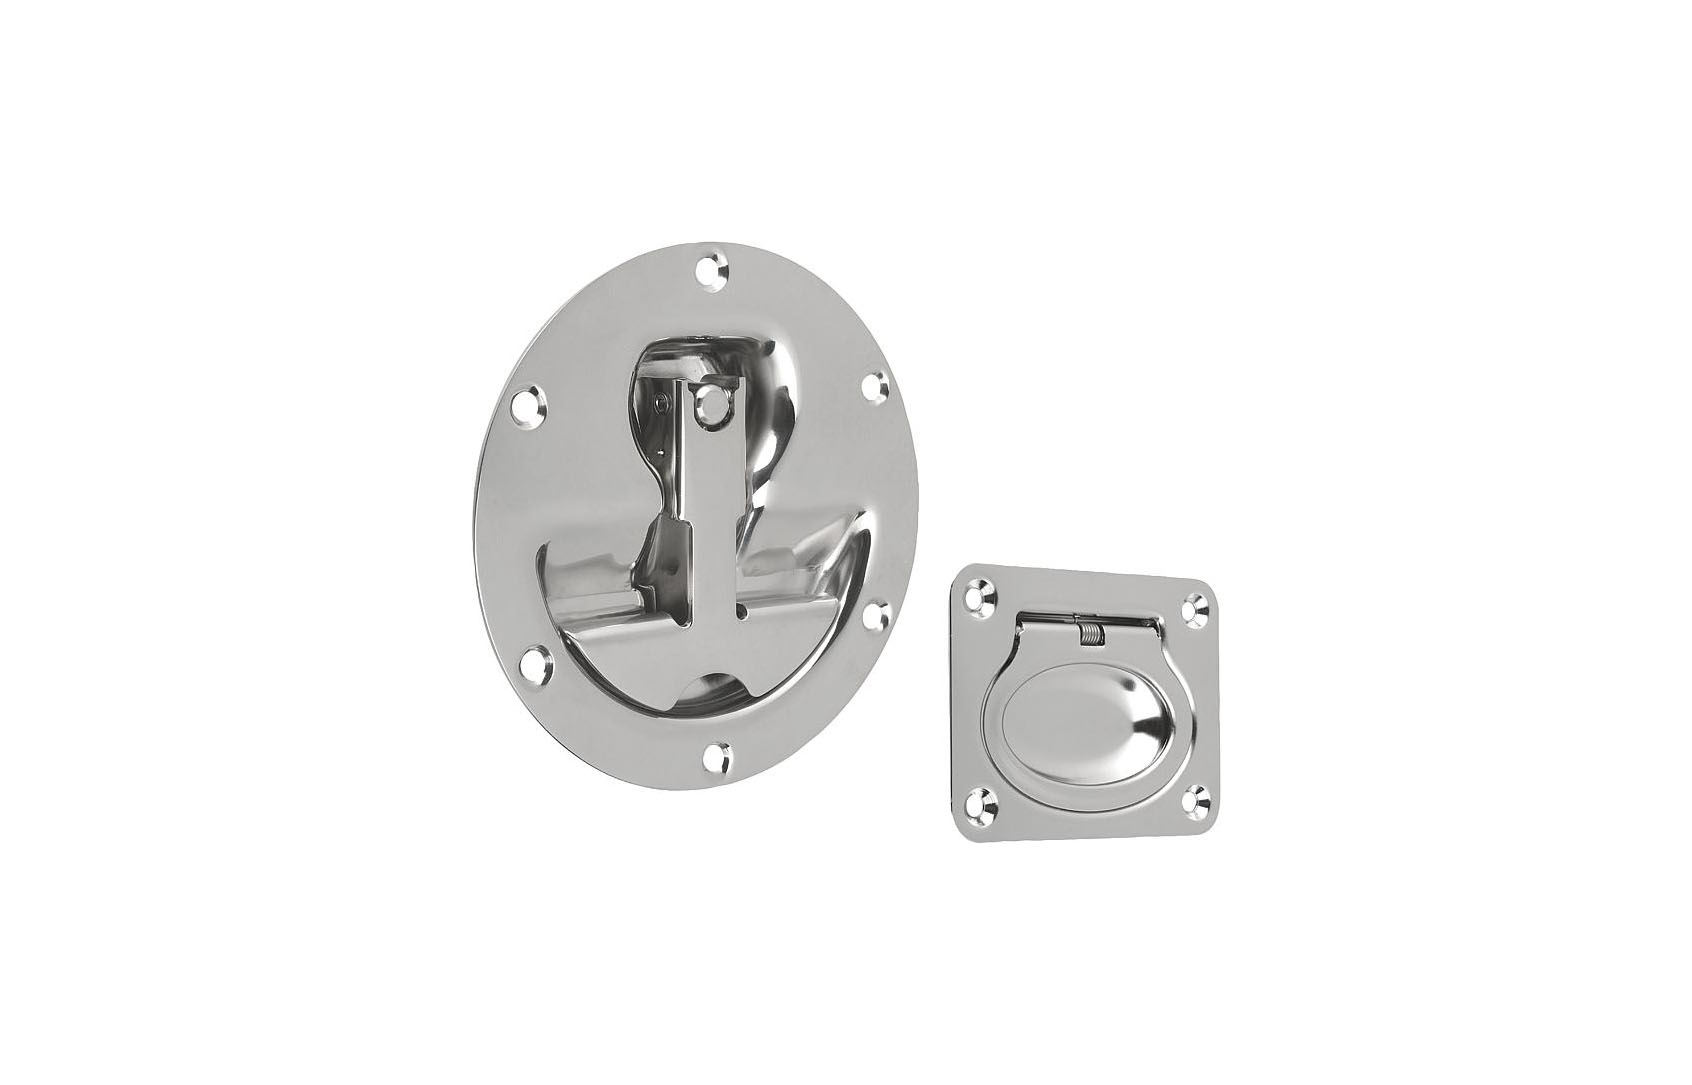 K0243_Recessed handles fold-down stainless steel